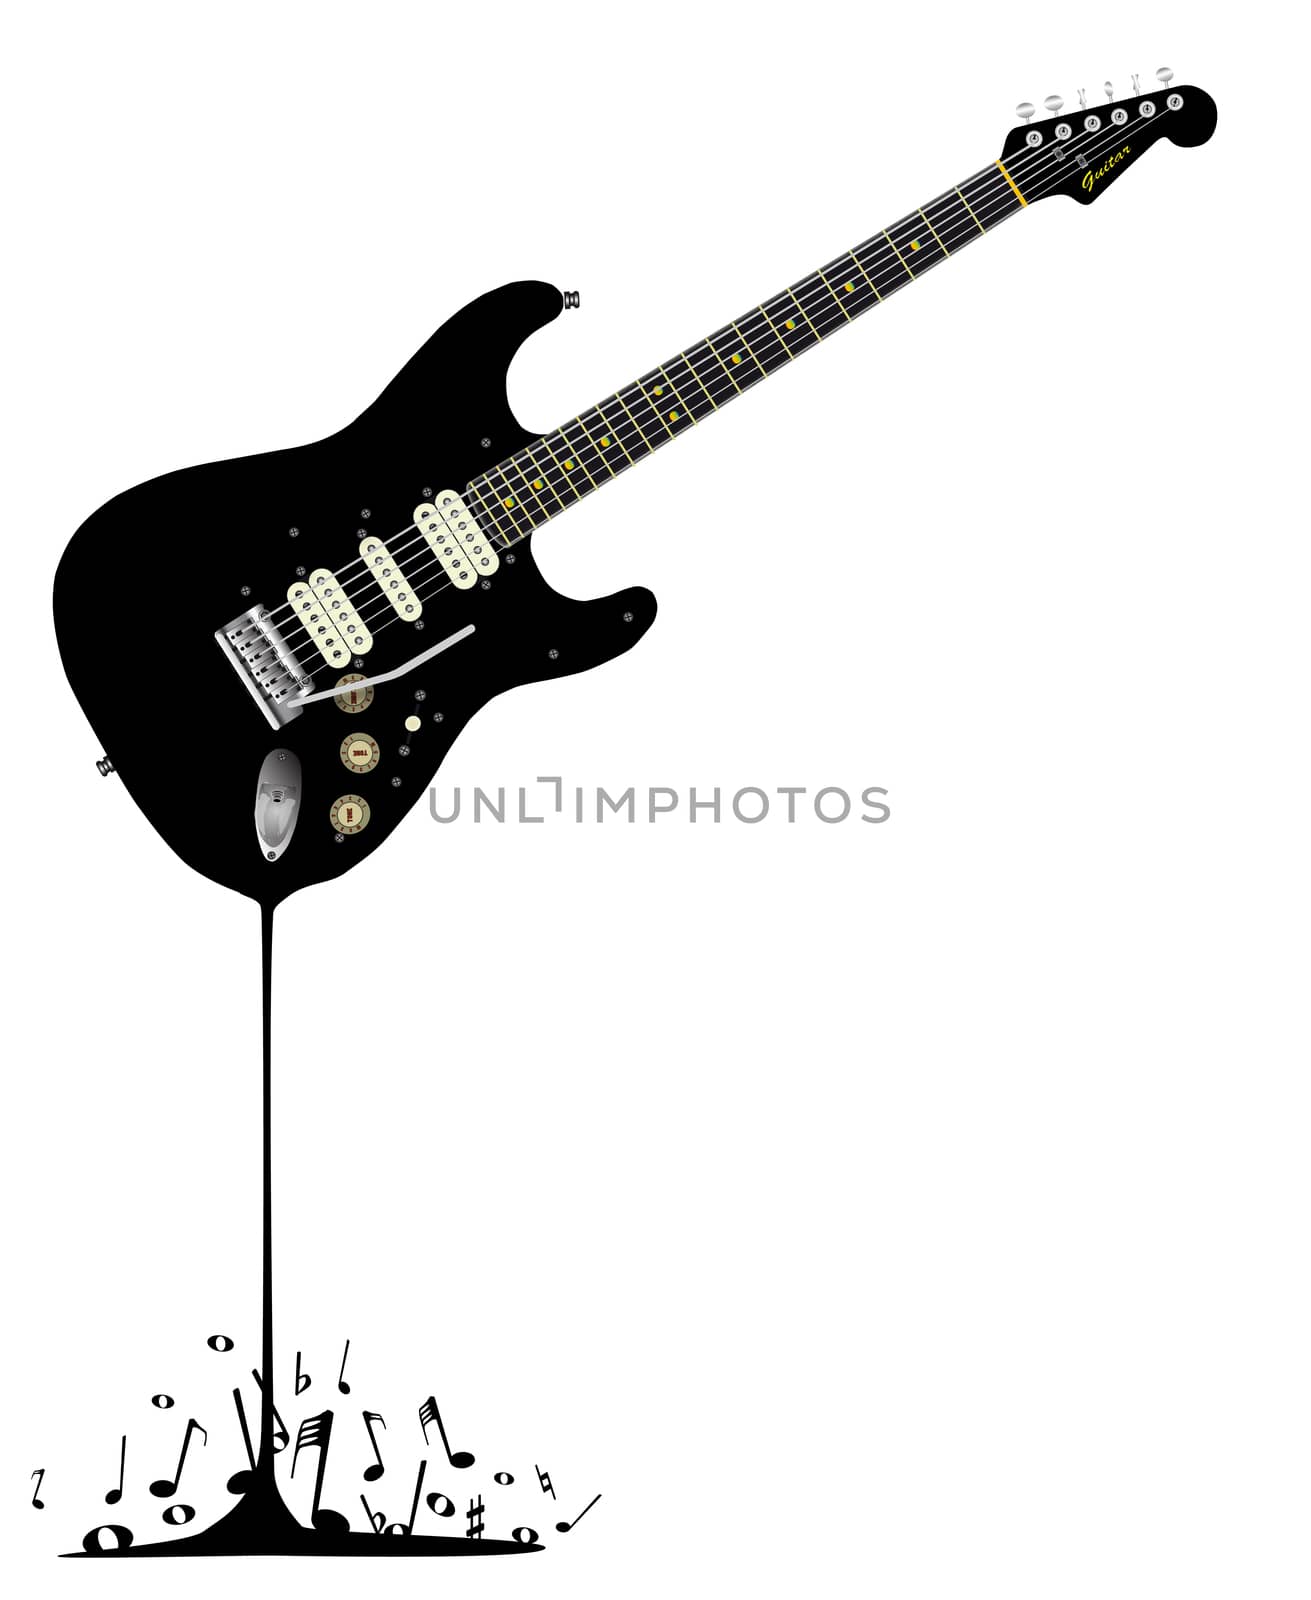 A black rock guitar melting down with musical notes spashing around at the base.